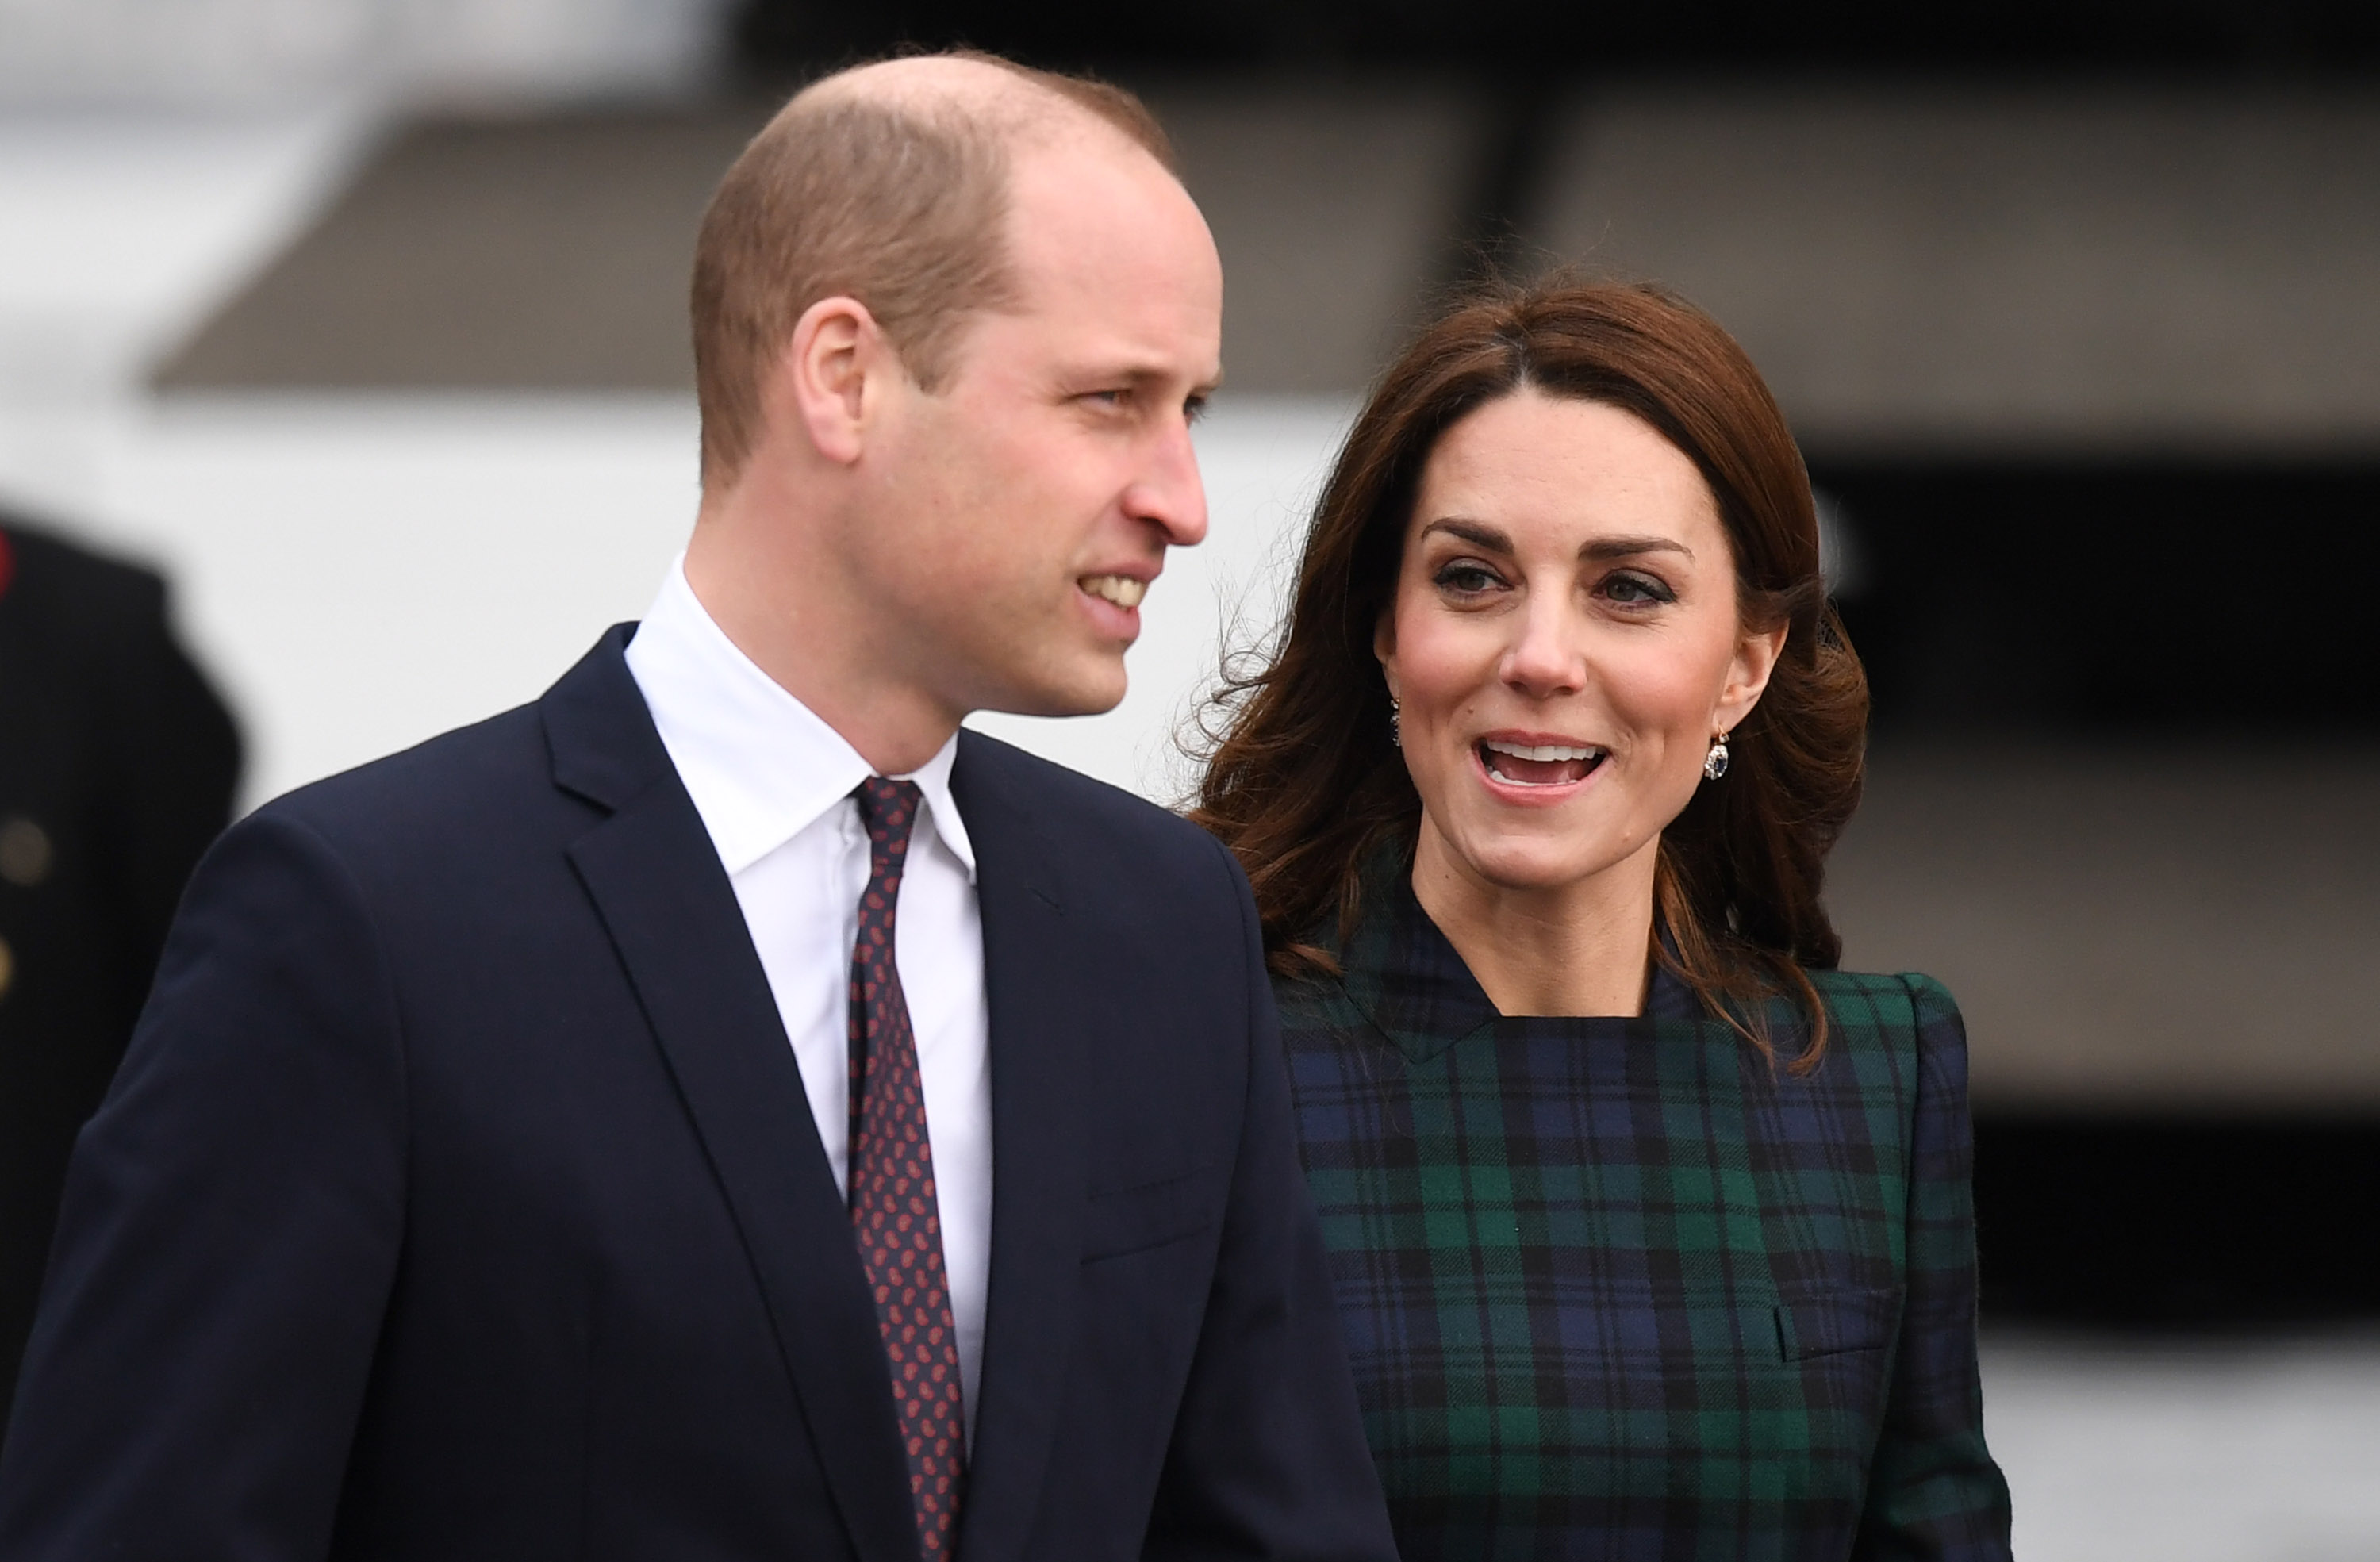 Catherine, Duchess of Cambridge and Prince William, Duke of Cambridge arrive to officially open V&A Dundee. Jeff J Mitchell/Getty Images